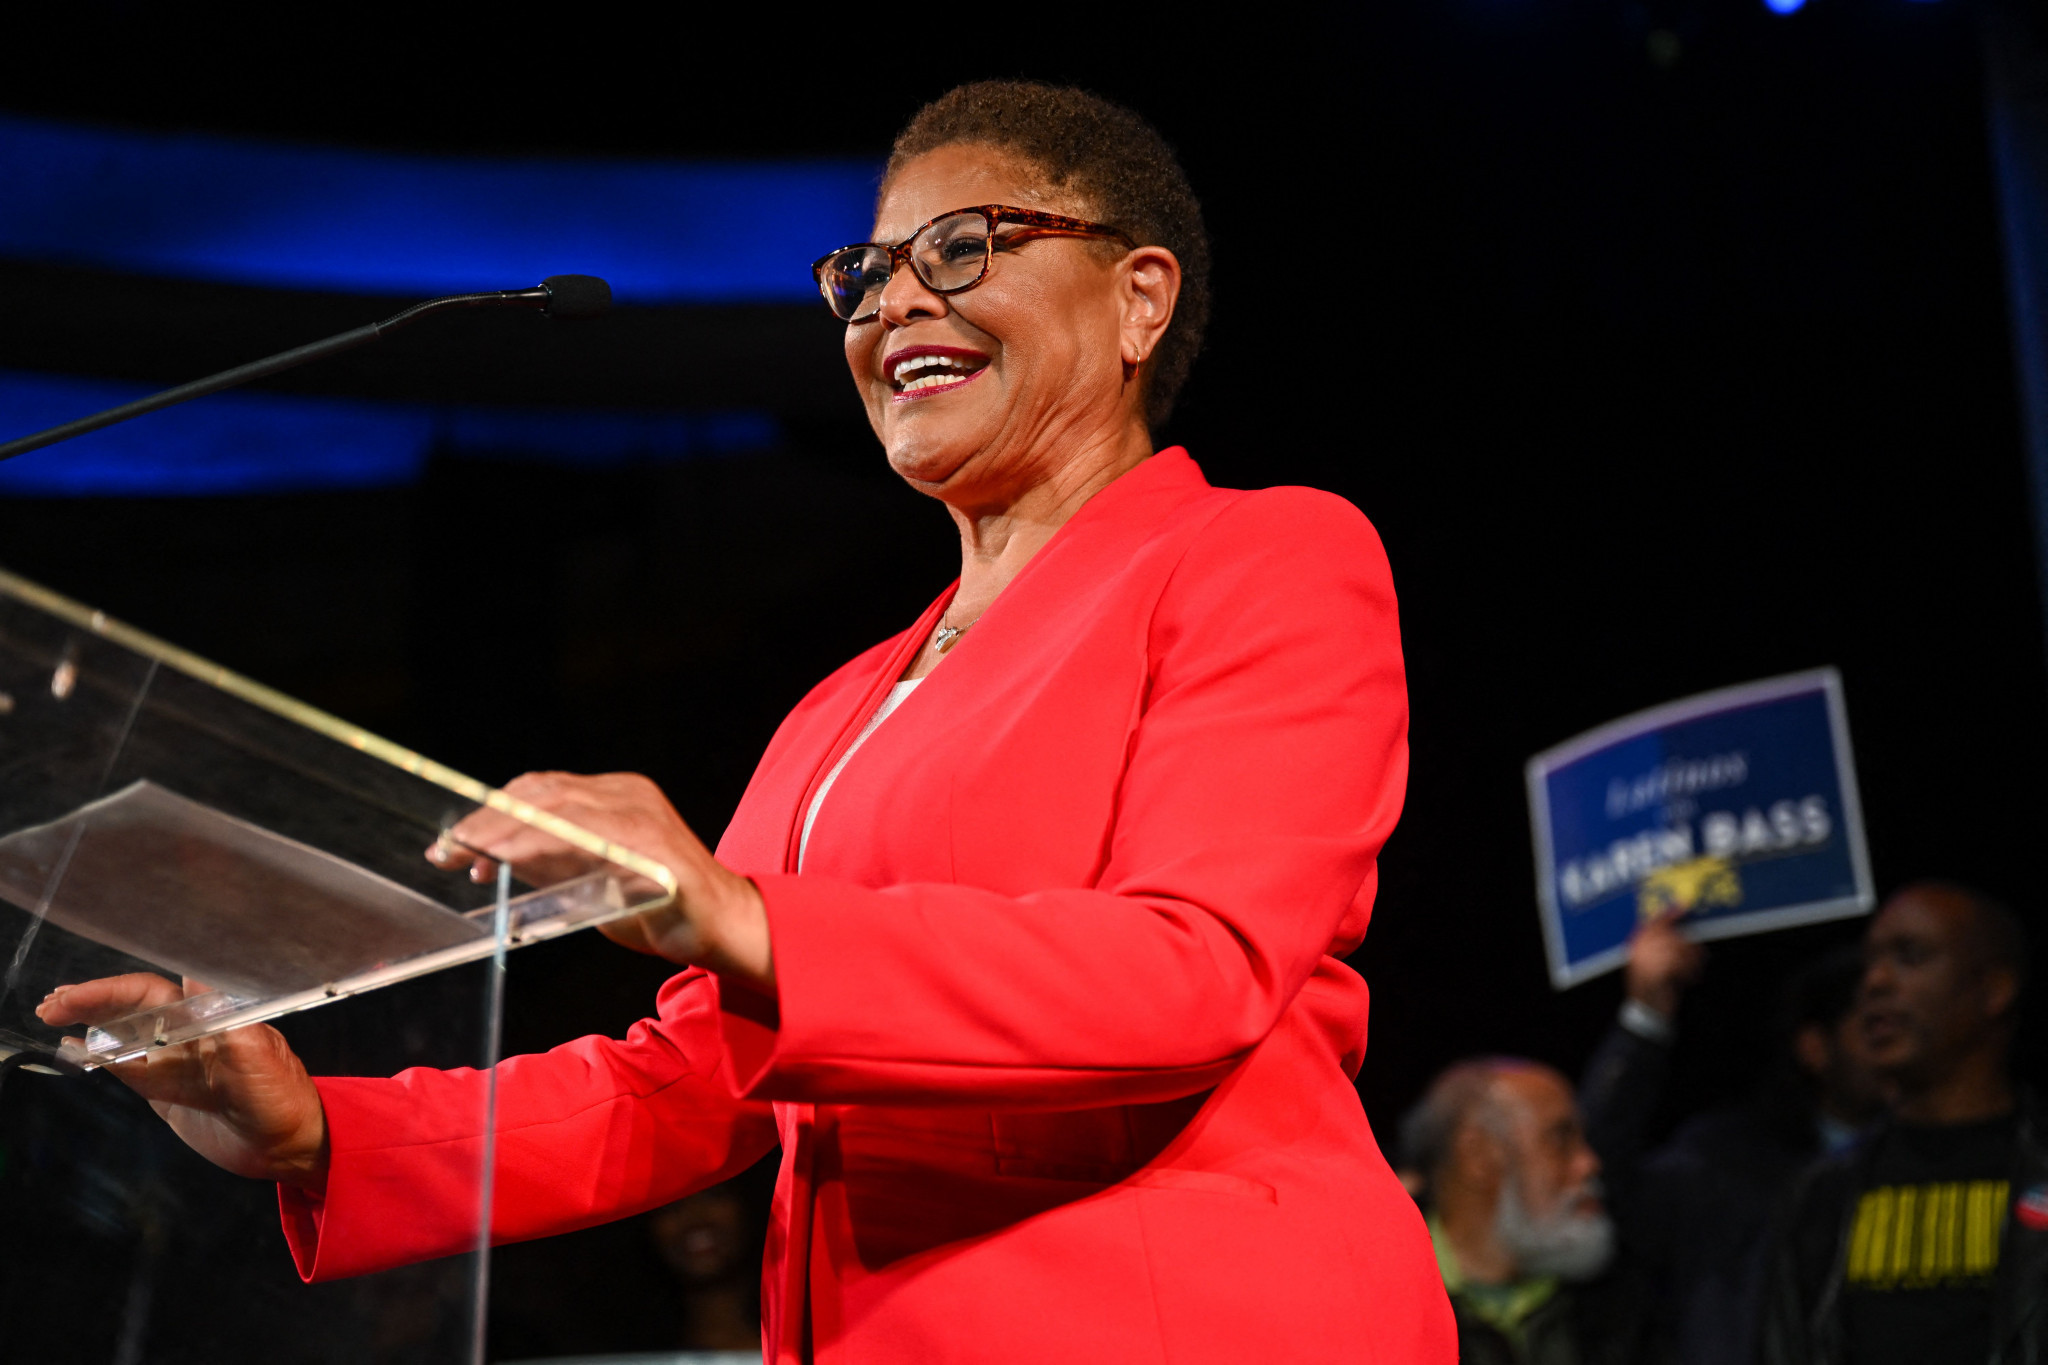 Democrat Karen Bass is set to oversee a vital period of preparations for the 2028 Olympic and Paralympic Games after being elected as Los Angeles' new Mayor ©Getty Images